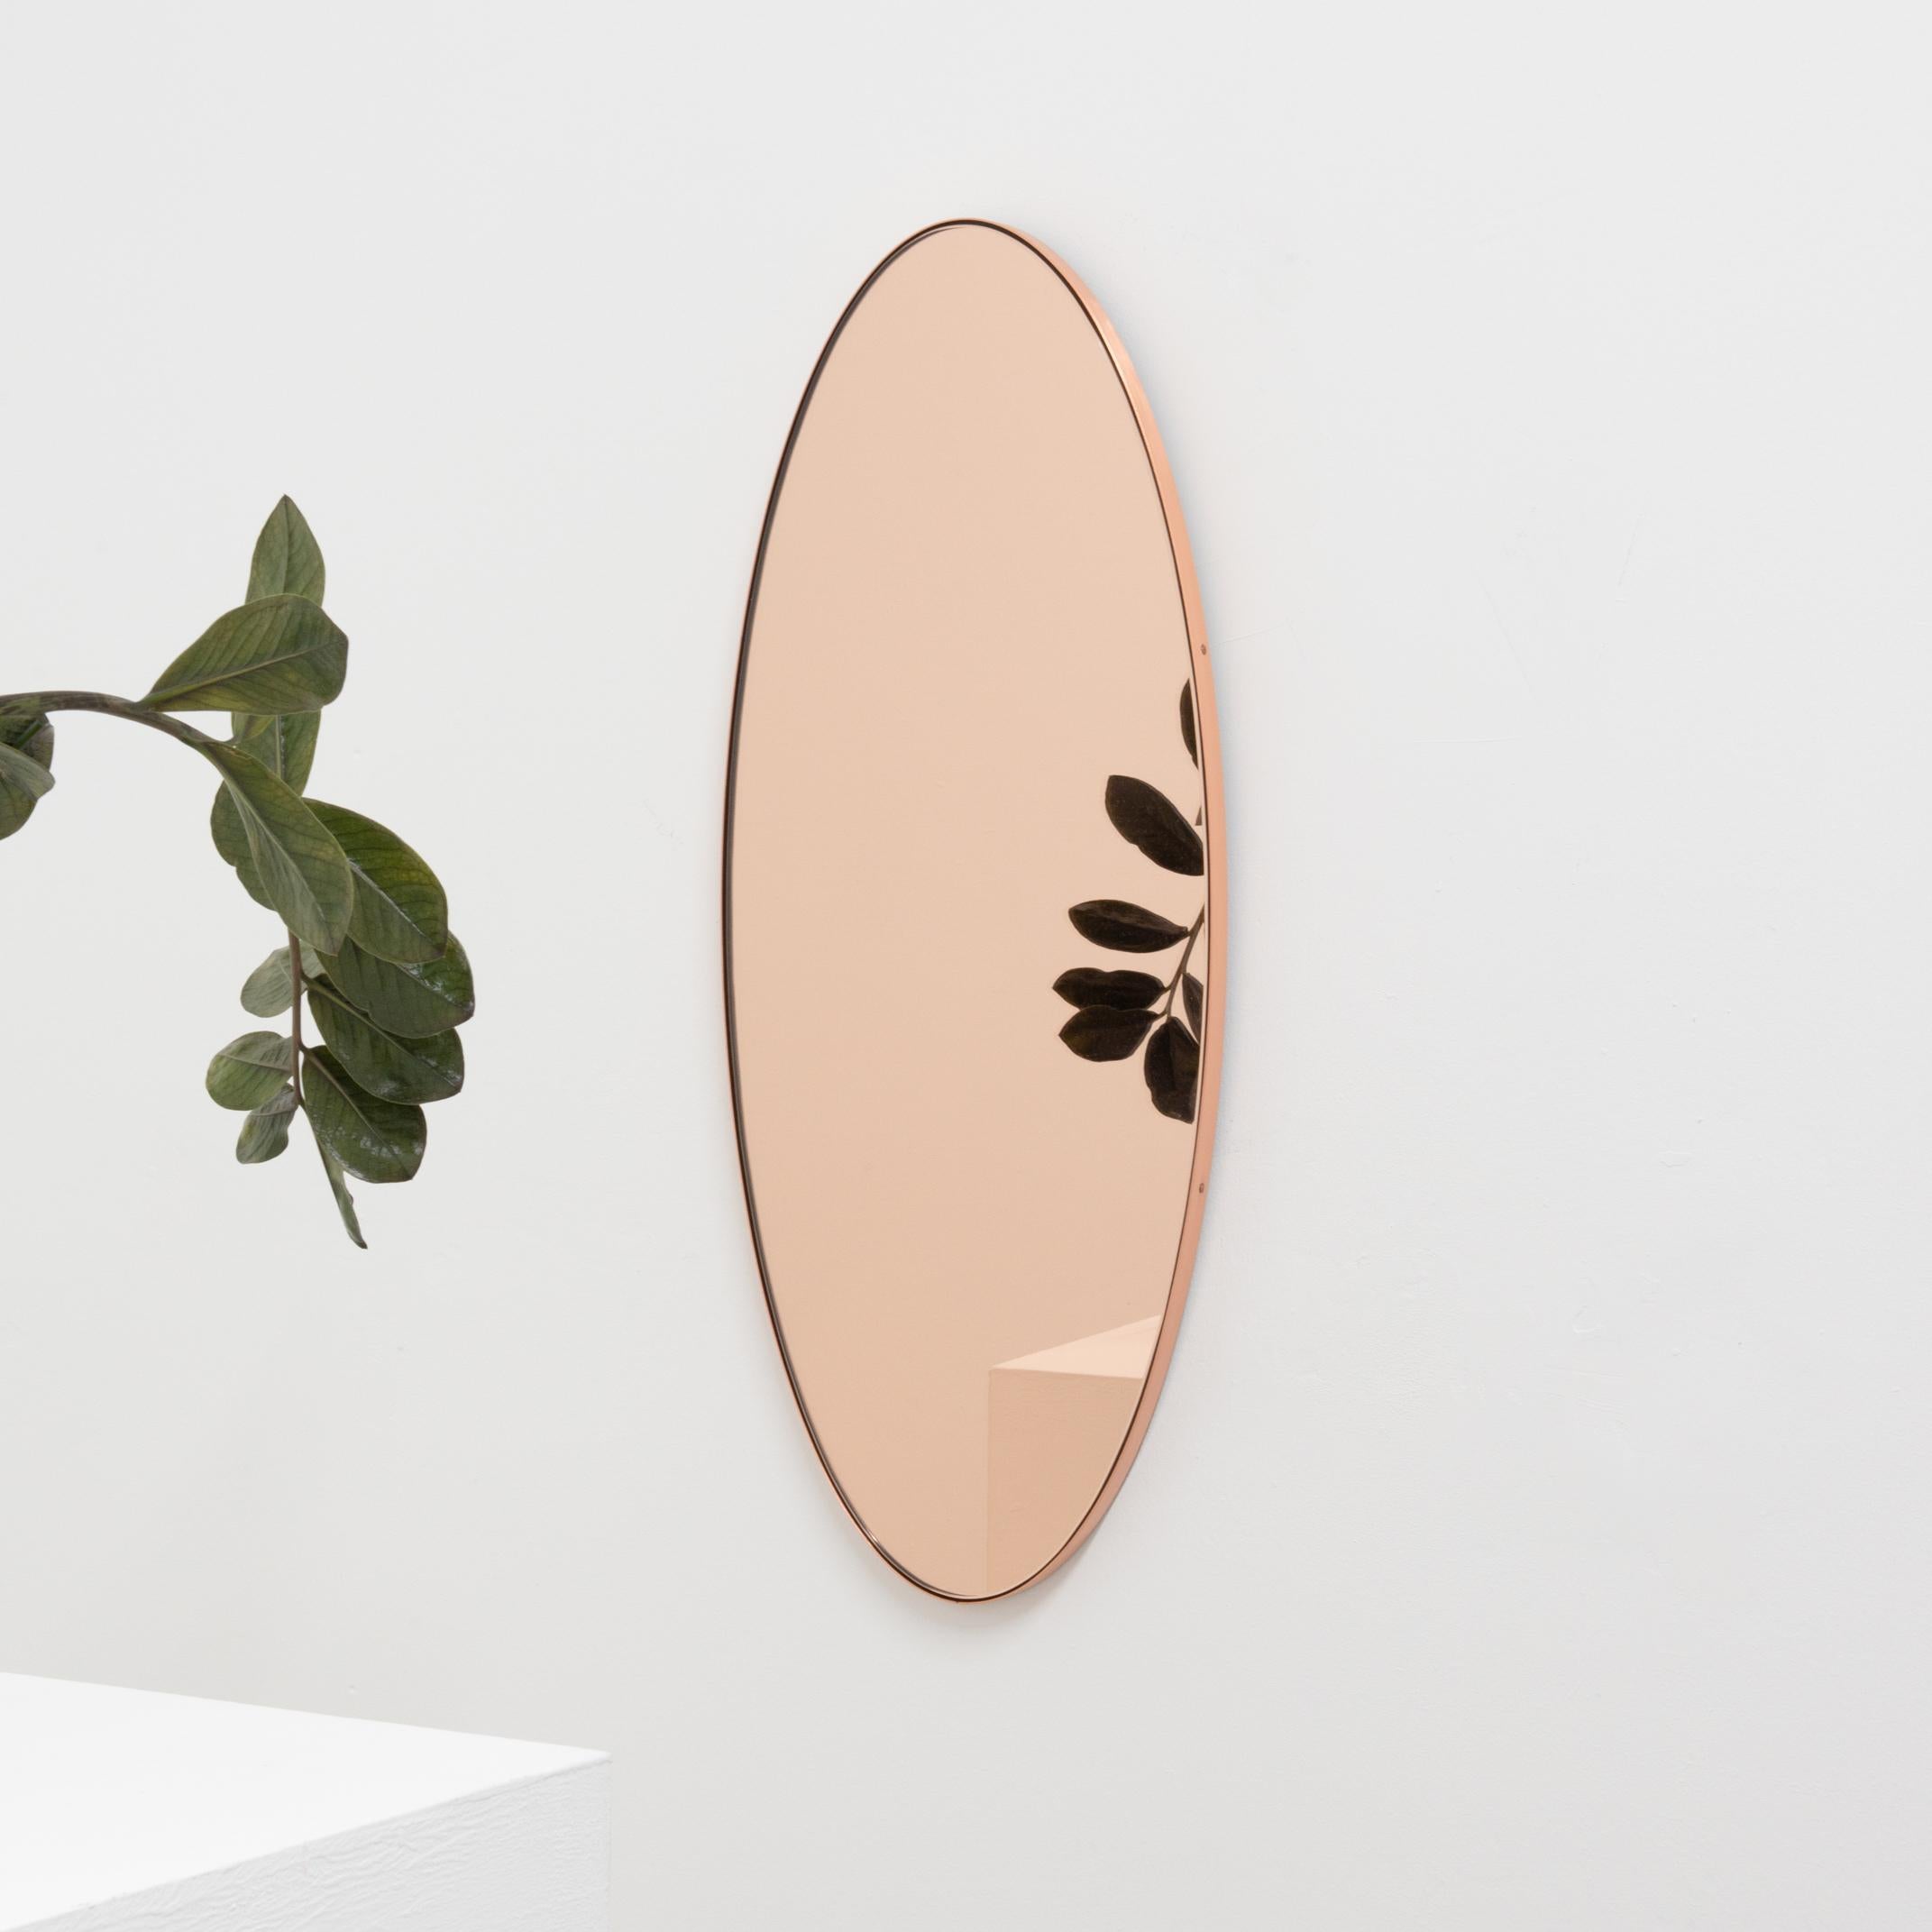 Contemporary Ovalis Oval shaped Modern Rose Gold Mirror with a Copper Frame, XL For Sale